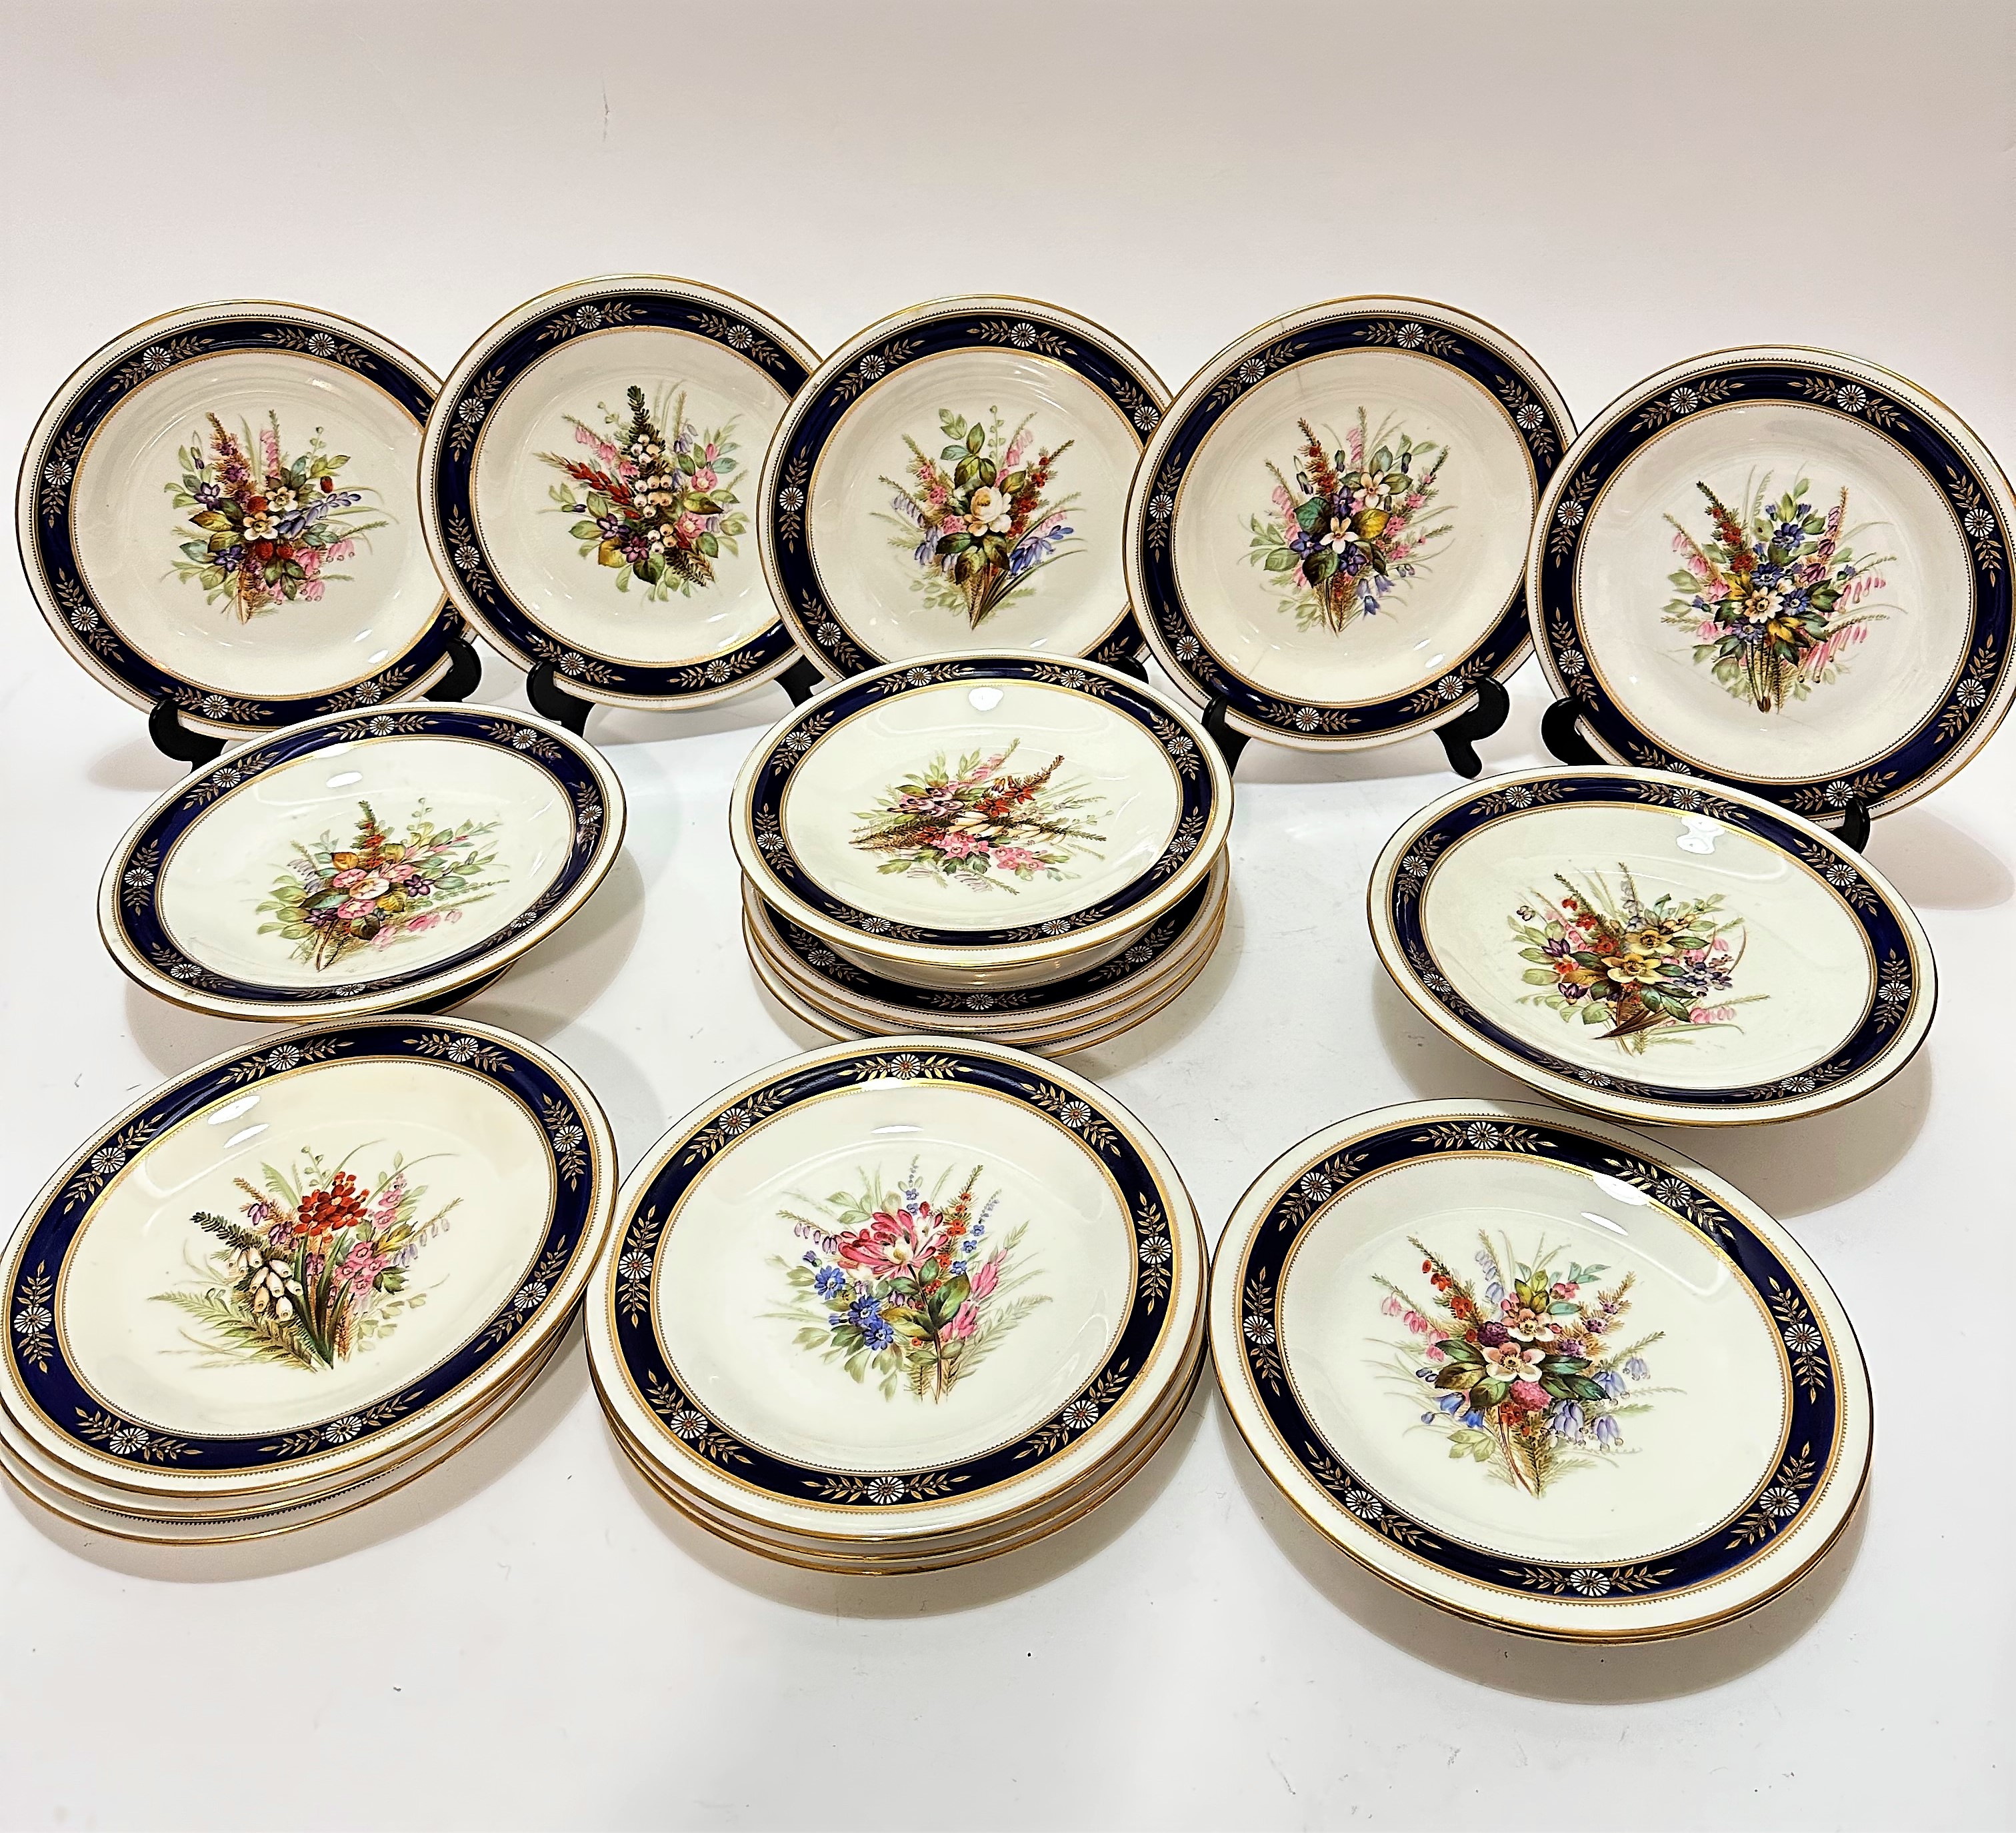 An Edwardian Royal Worcester nineteen piece dessert service including three stands, (5cm x 23cm) and